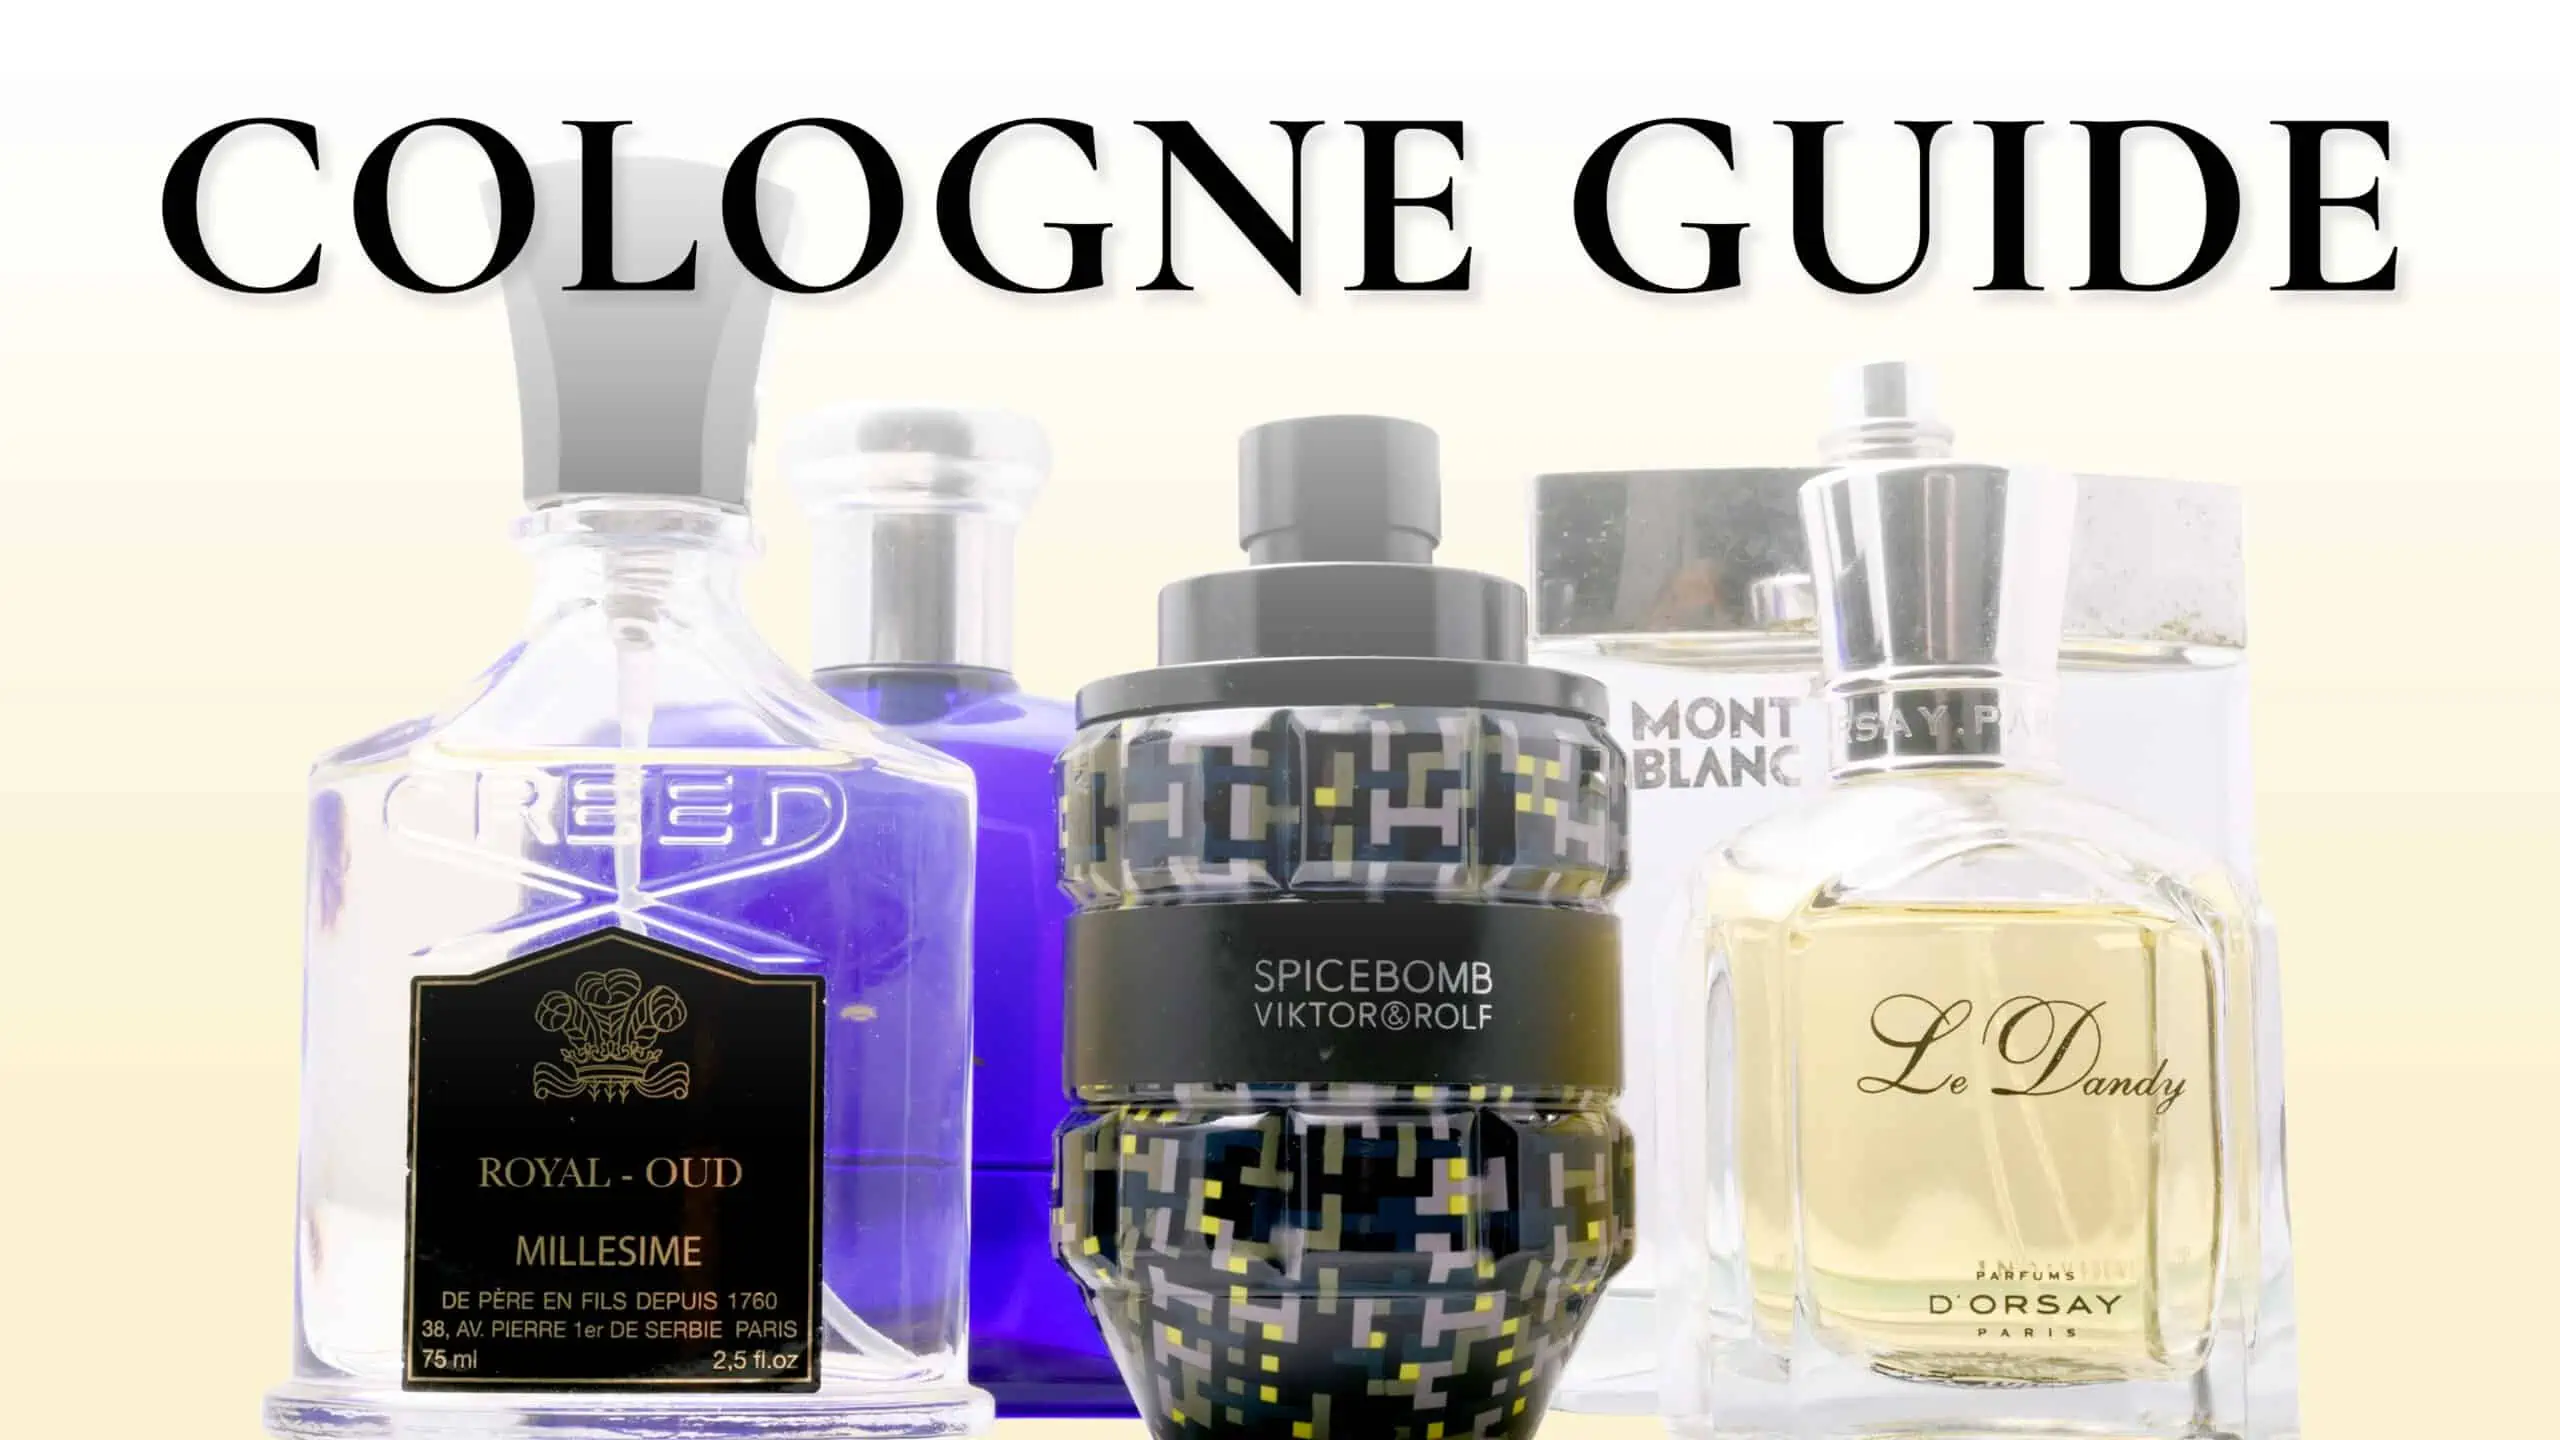 The Cologne Guide